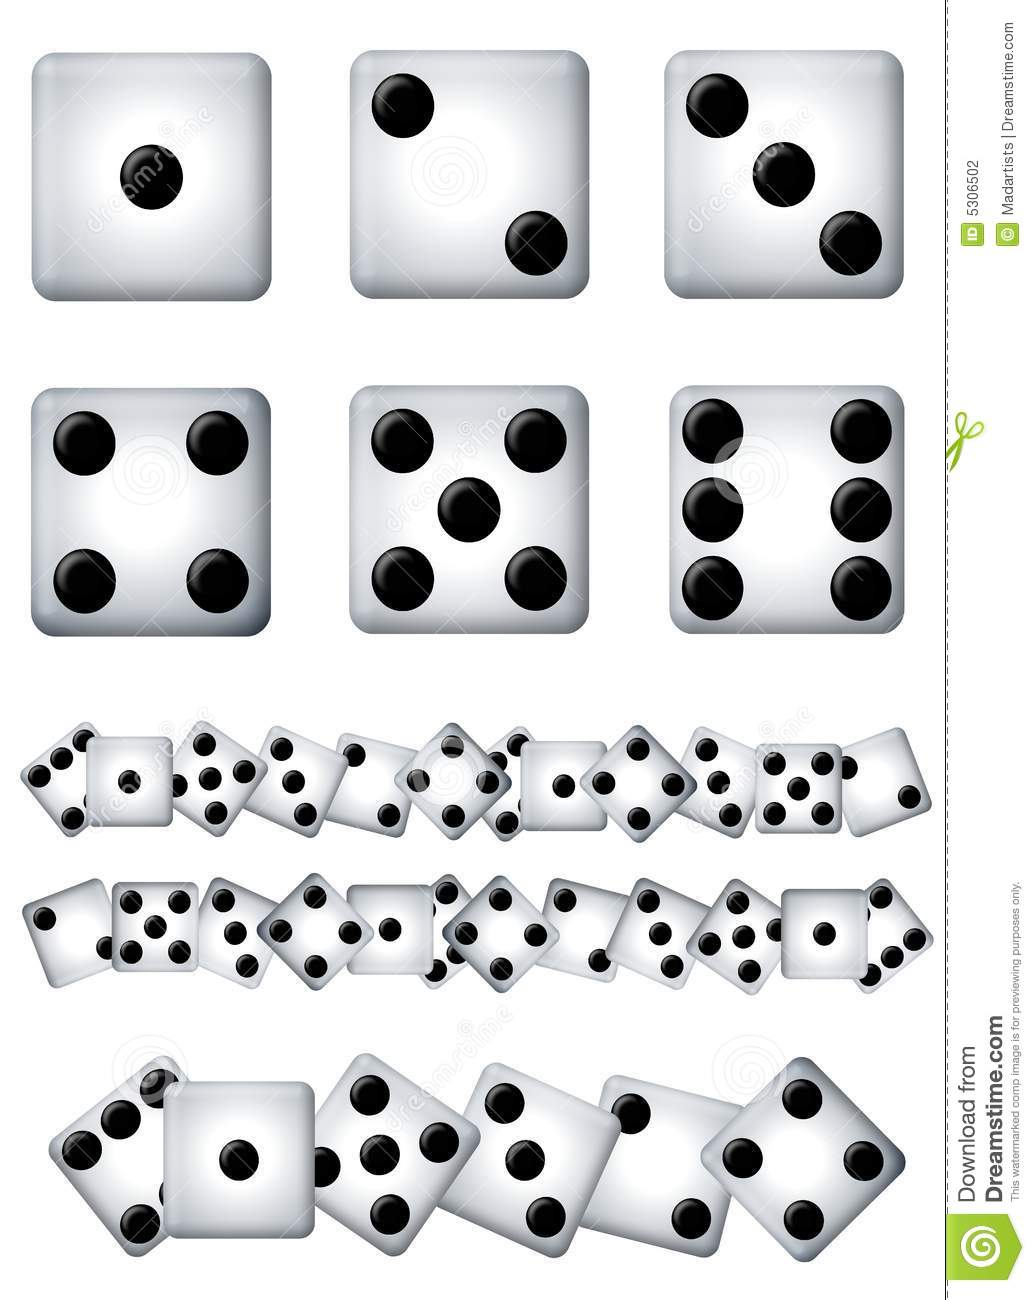 Clip Art Dice Singles and Rows